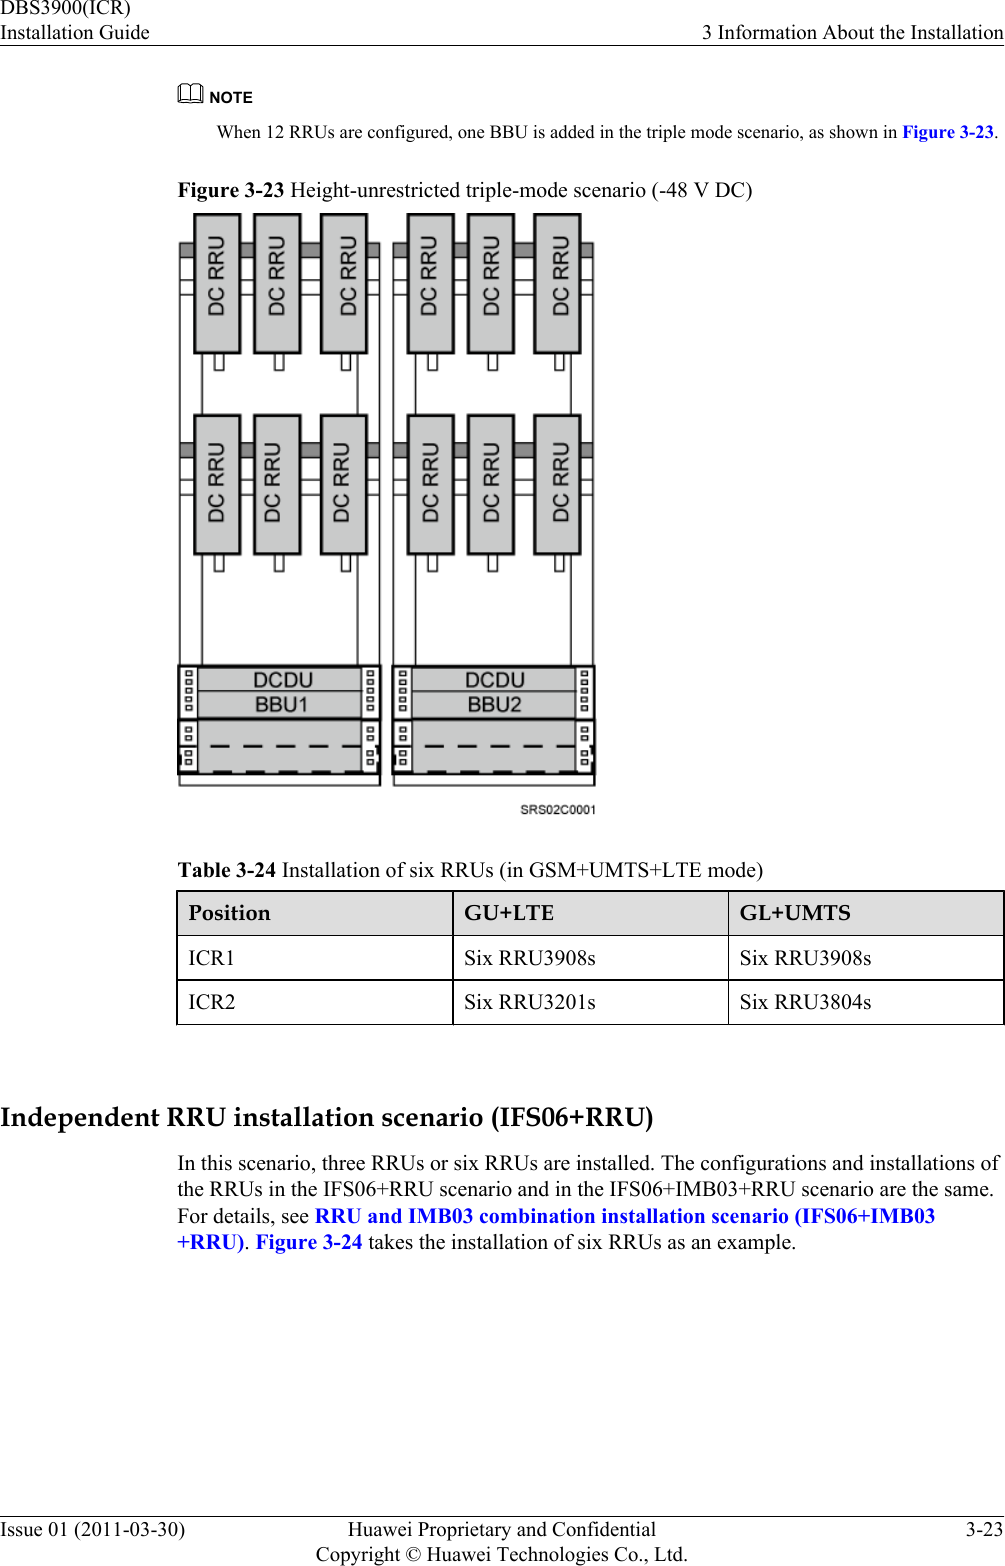 NOTEWhen 12 RRUs are configured, one BBU is added in the triple mode scenario, as shown in Figure 3-23.Figure 3-23 Height-unrestricted triple-mode scenario (-48 V DC)Table 3-24 Installation of six RRUs (in GSM+UMTS+LTE mode)Position GU+LTE GL+UMTSICR1 Six RRU3908s Six RRU3908sICR2 Six RRU3201s Six RRU3804s Independent RRU installation scenario (IFS06+RRU)In this scenario, three RRUs or six RRUs are installed. The configurations and installations ofthe RRUs in the IFS06+RRU scenario and in the IFS06+IMB03+RRU scenario are the same.For details, see RRU and IMB03 combination installation scenario (IFS06+IMB03+RRU). Figure 3-24 takes the installation of six RRUs as an example.DBS3900(ICR)Installation Guide 3 Information About the InstallationIssue 01 (2011-03-30) Huawei Proprietary and ConfidentialCopyright © Huawei Technologies Co., Ltd.3-23